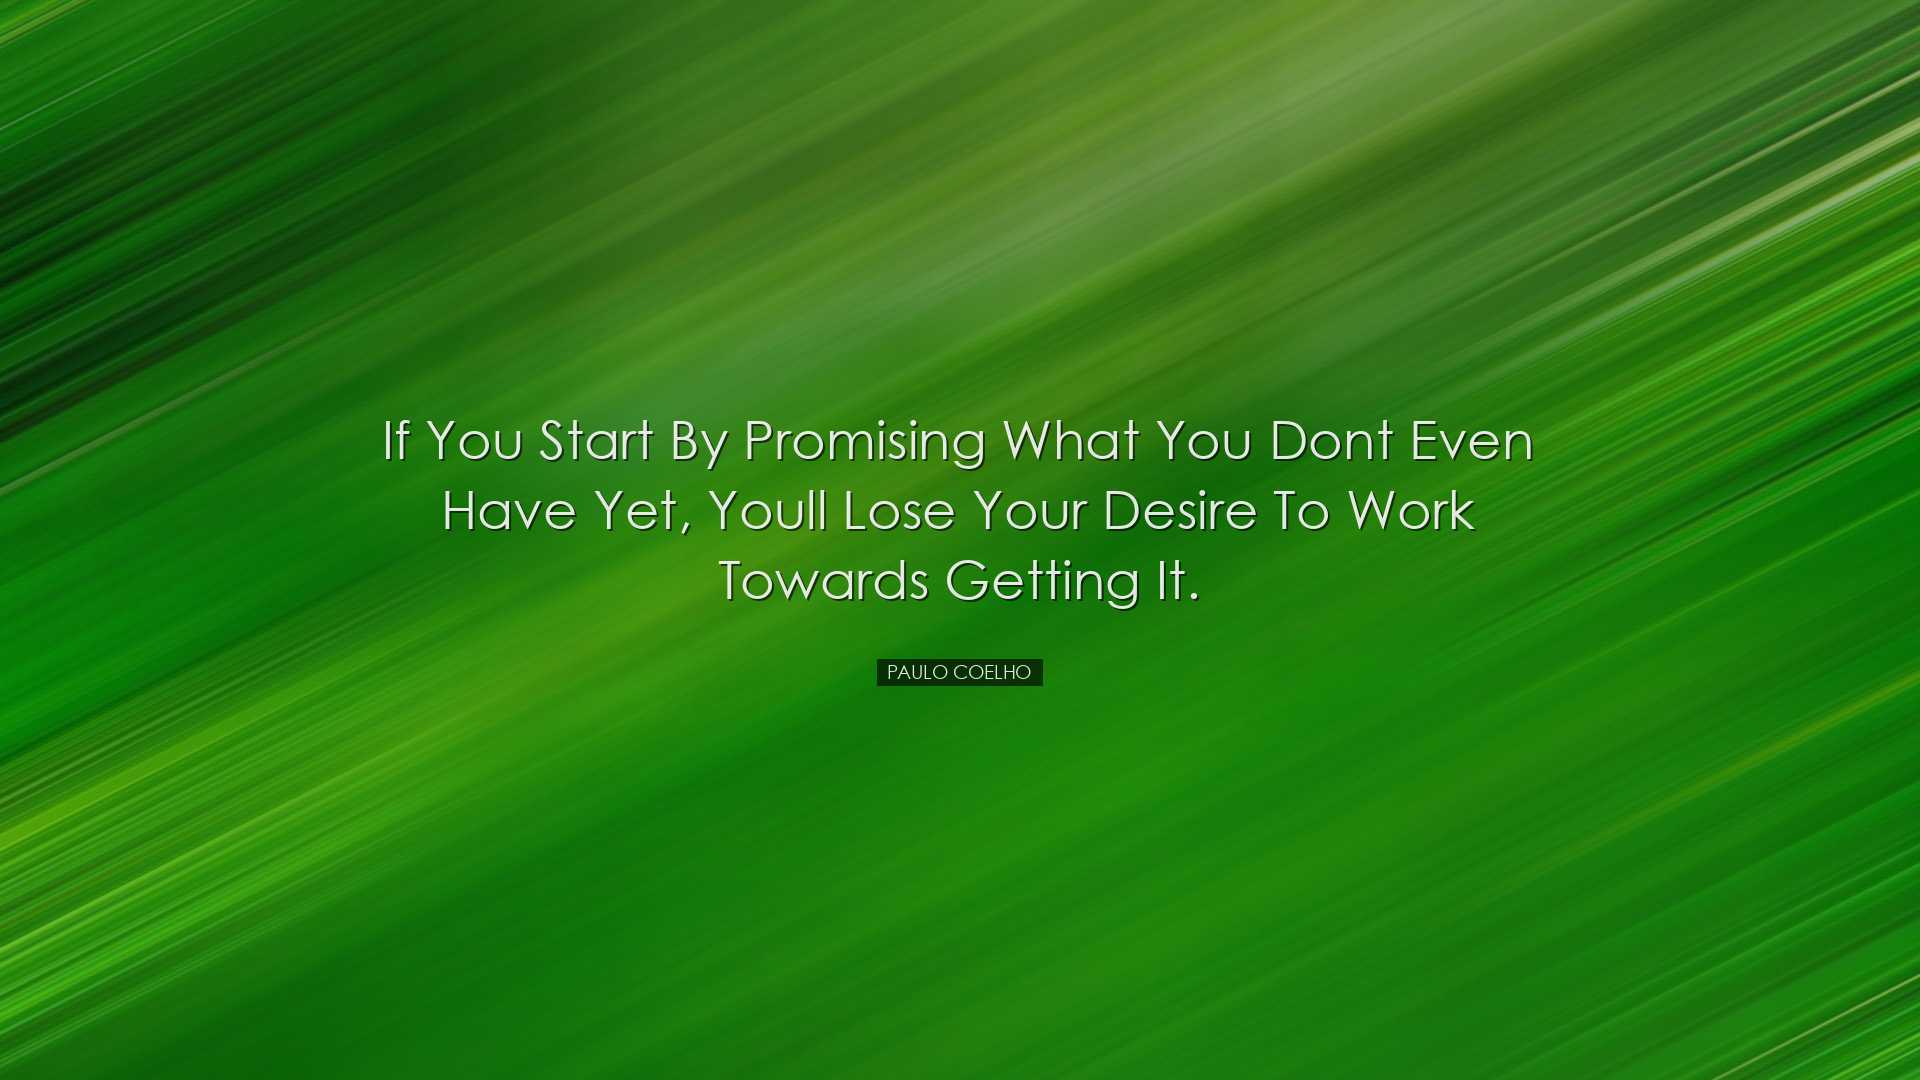 If you start by promising what you dont even have yet, youll lose